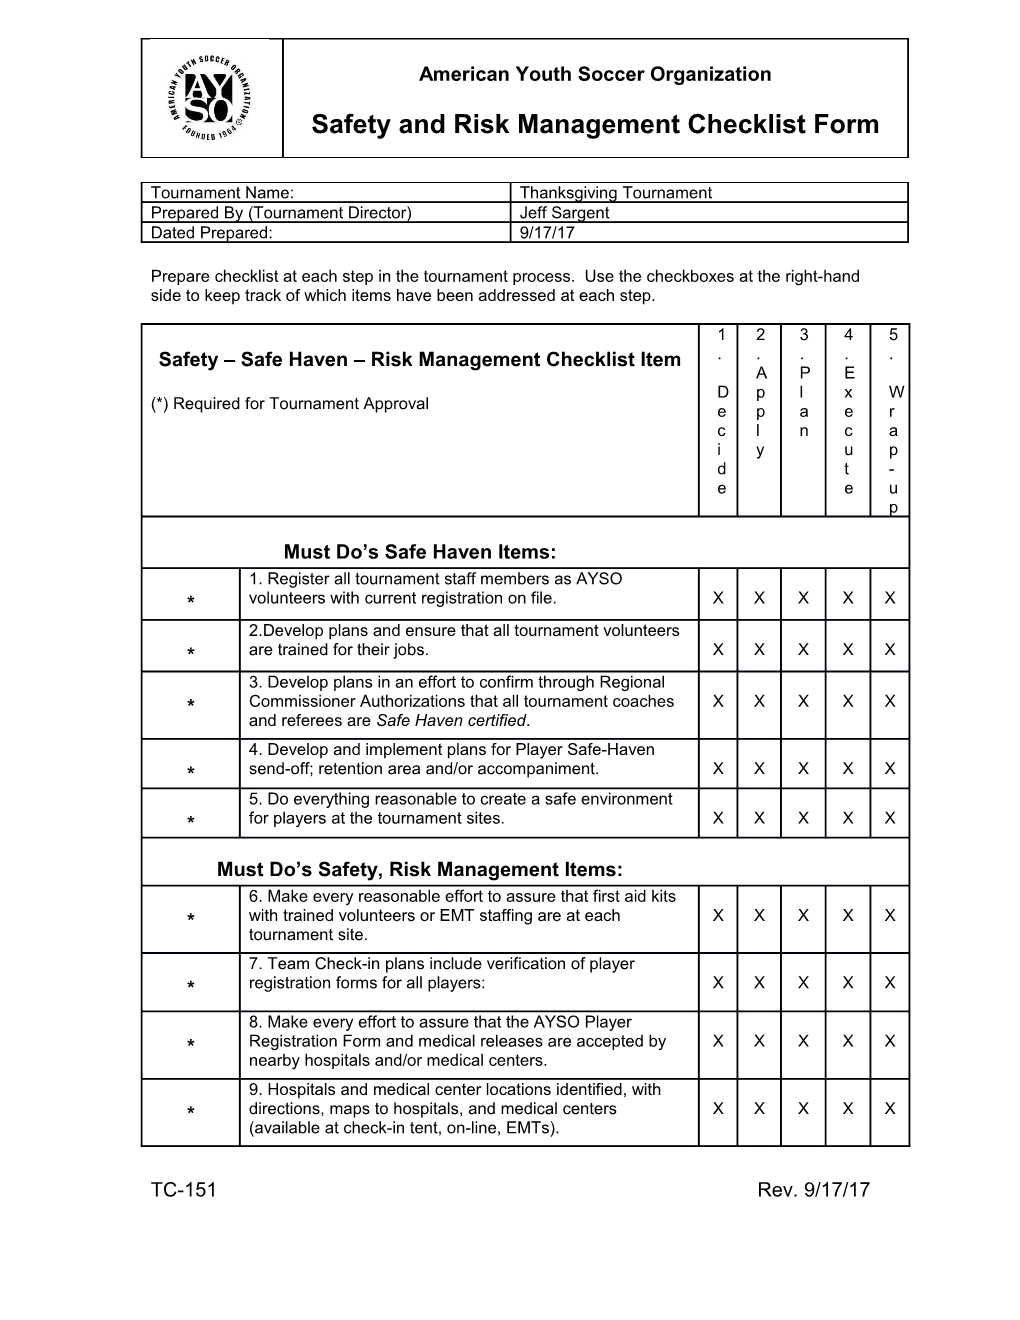 Prepare Checklist at Each Step in the Tournament Process. Use the Checkboxes at the Right-Hand